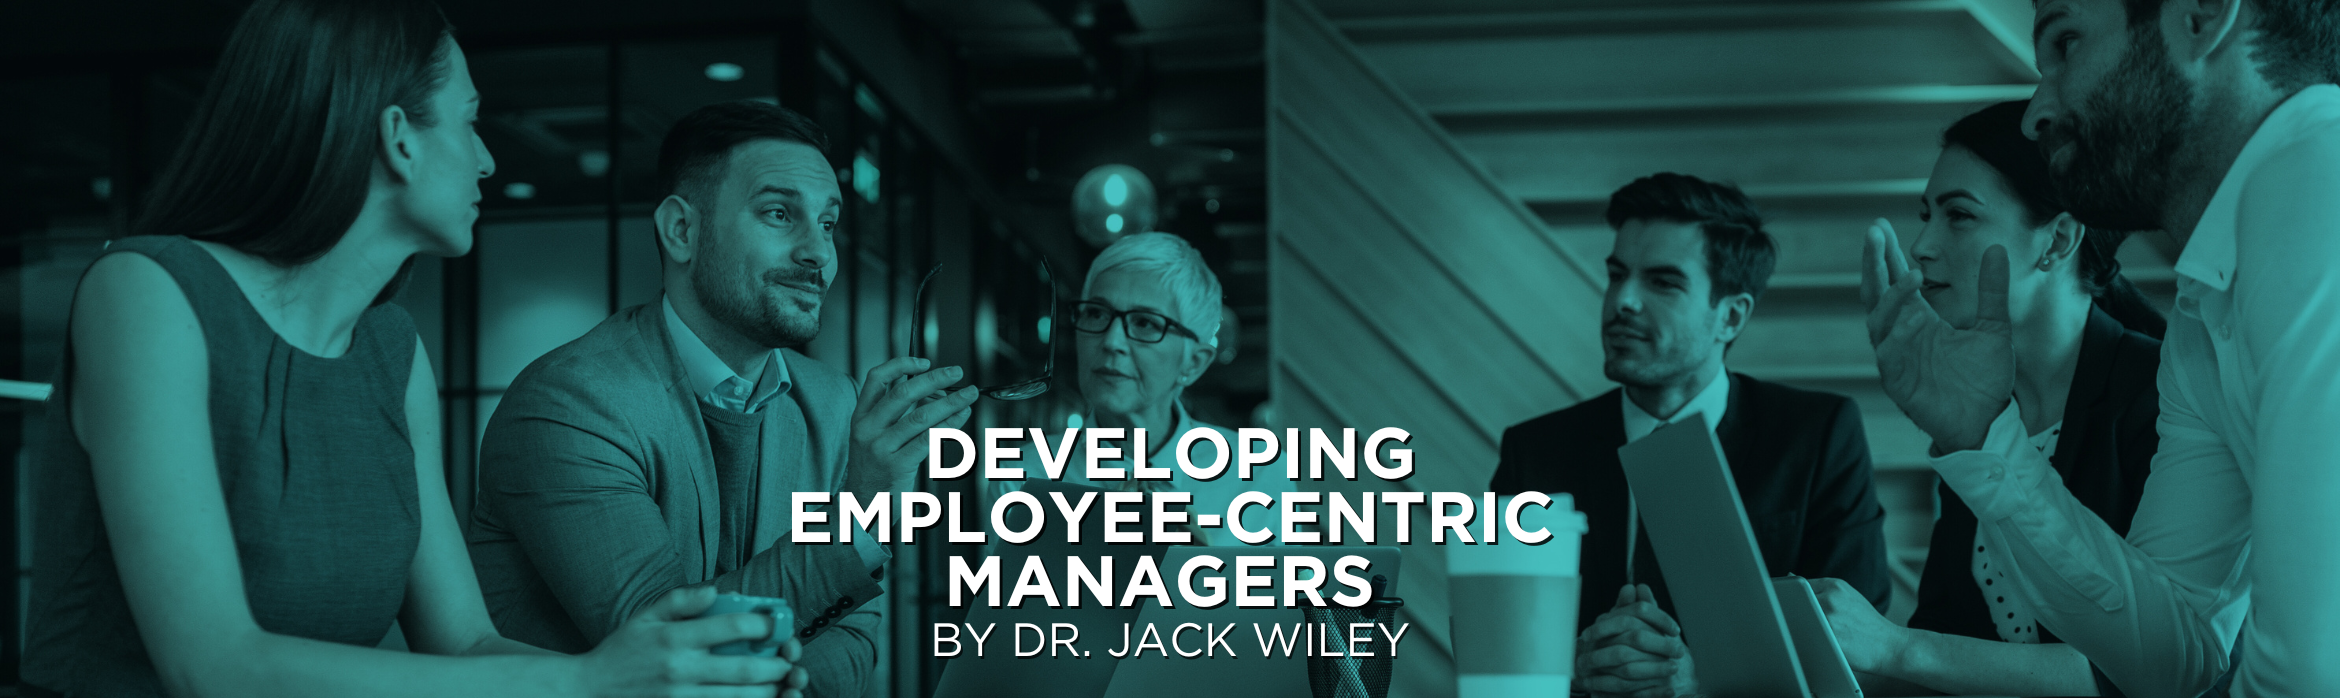 Developing Employee-Centric Managers